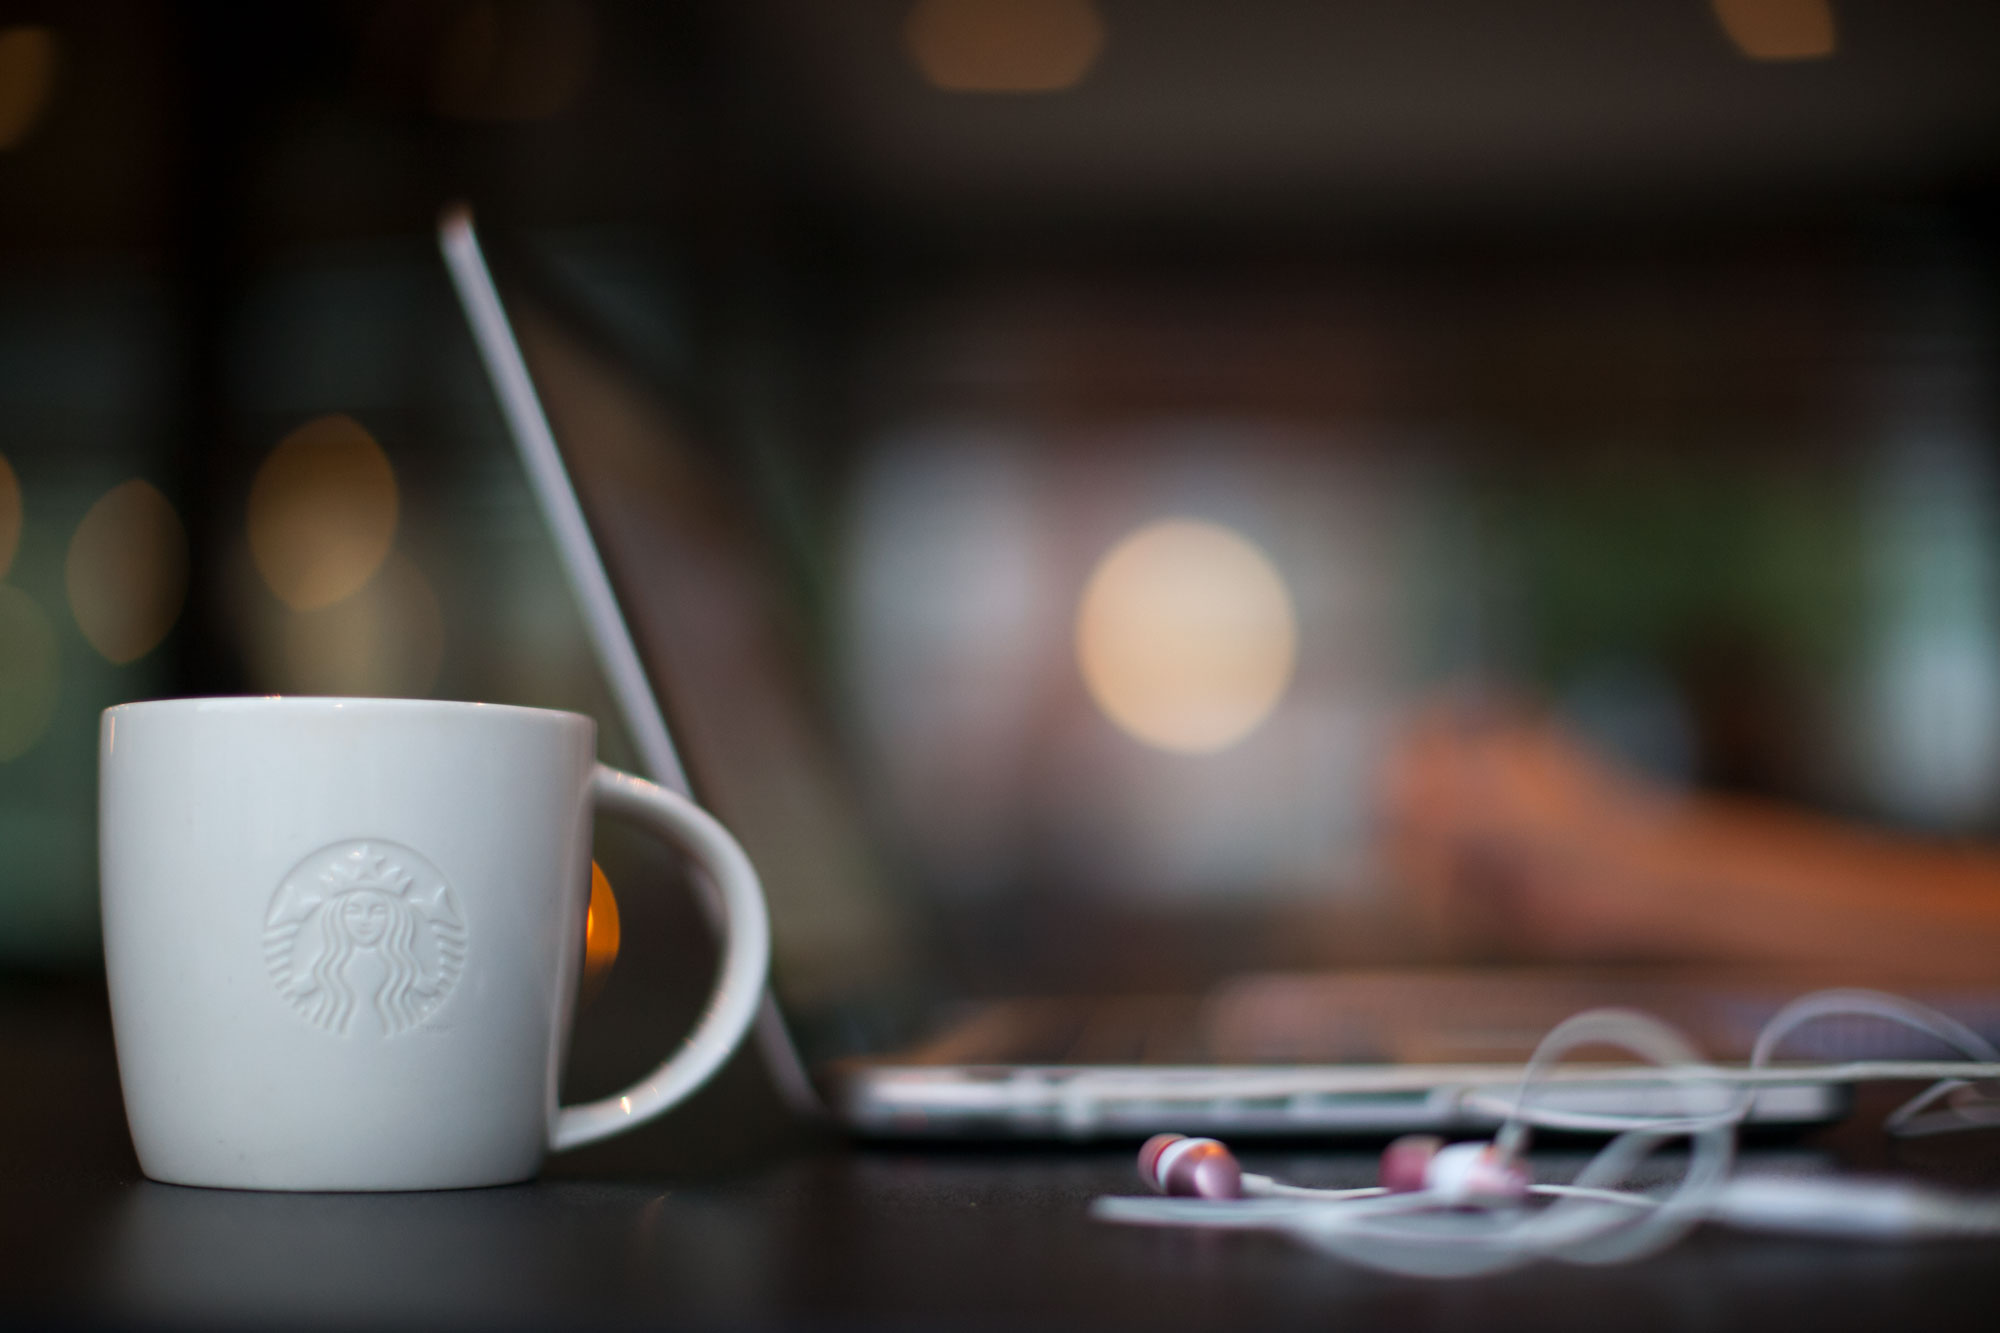 Starbucks Lifestyle Image with Mug, Laptop and Earbuds